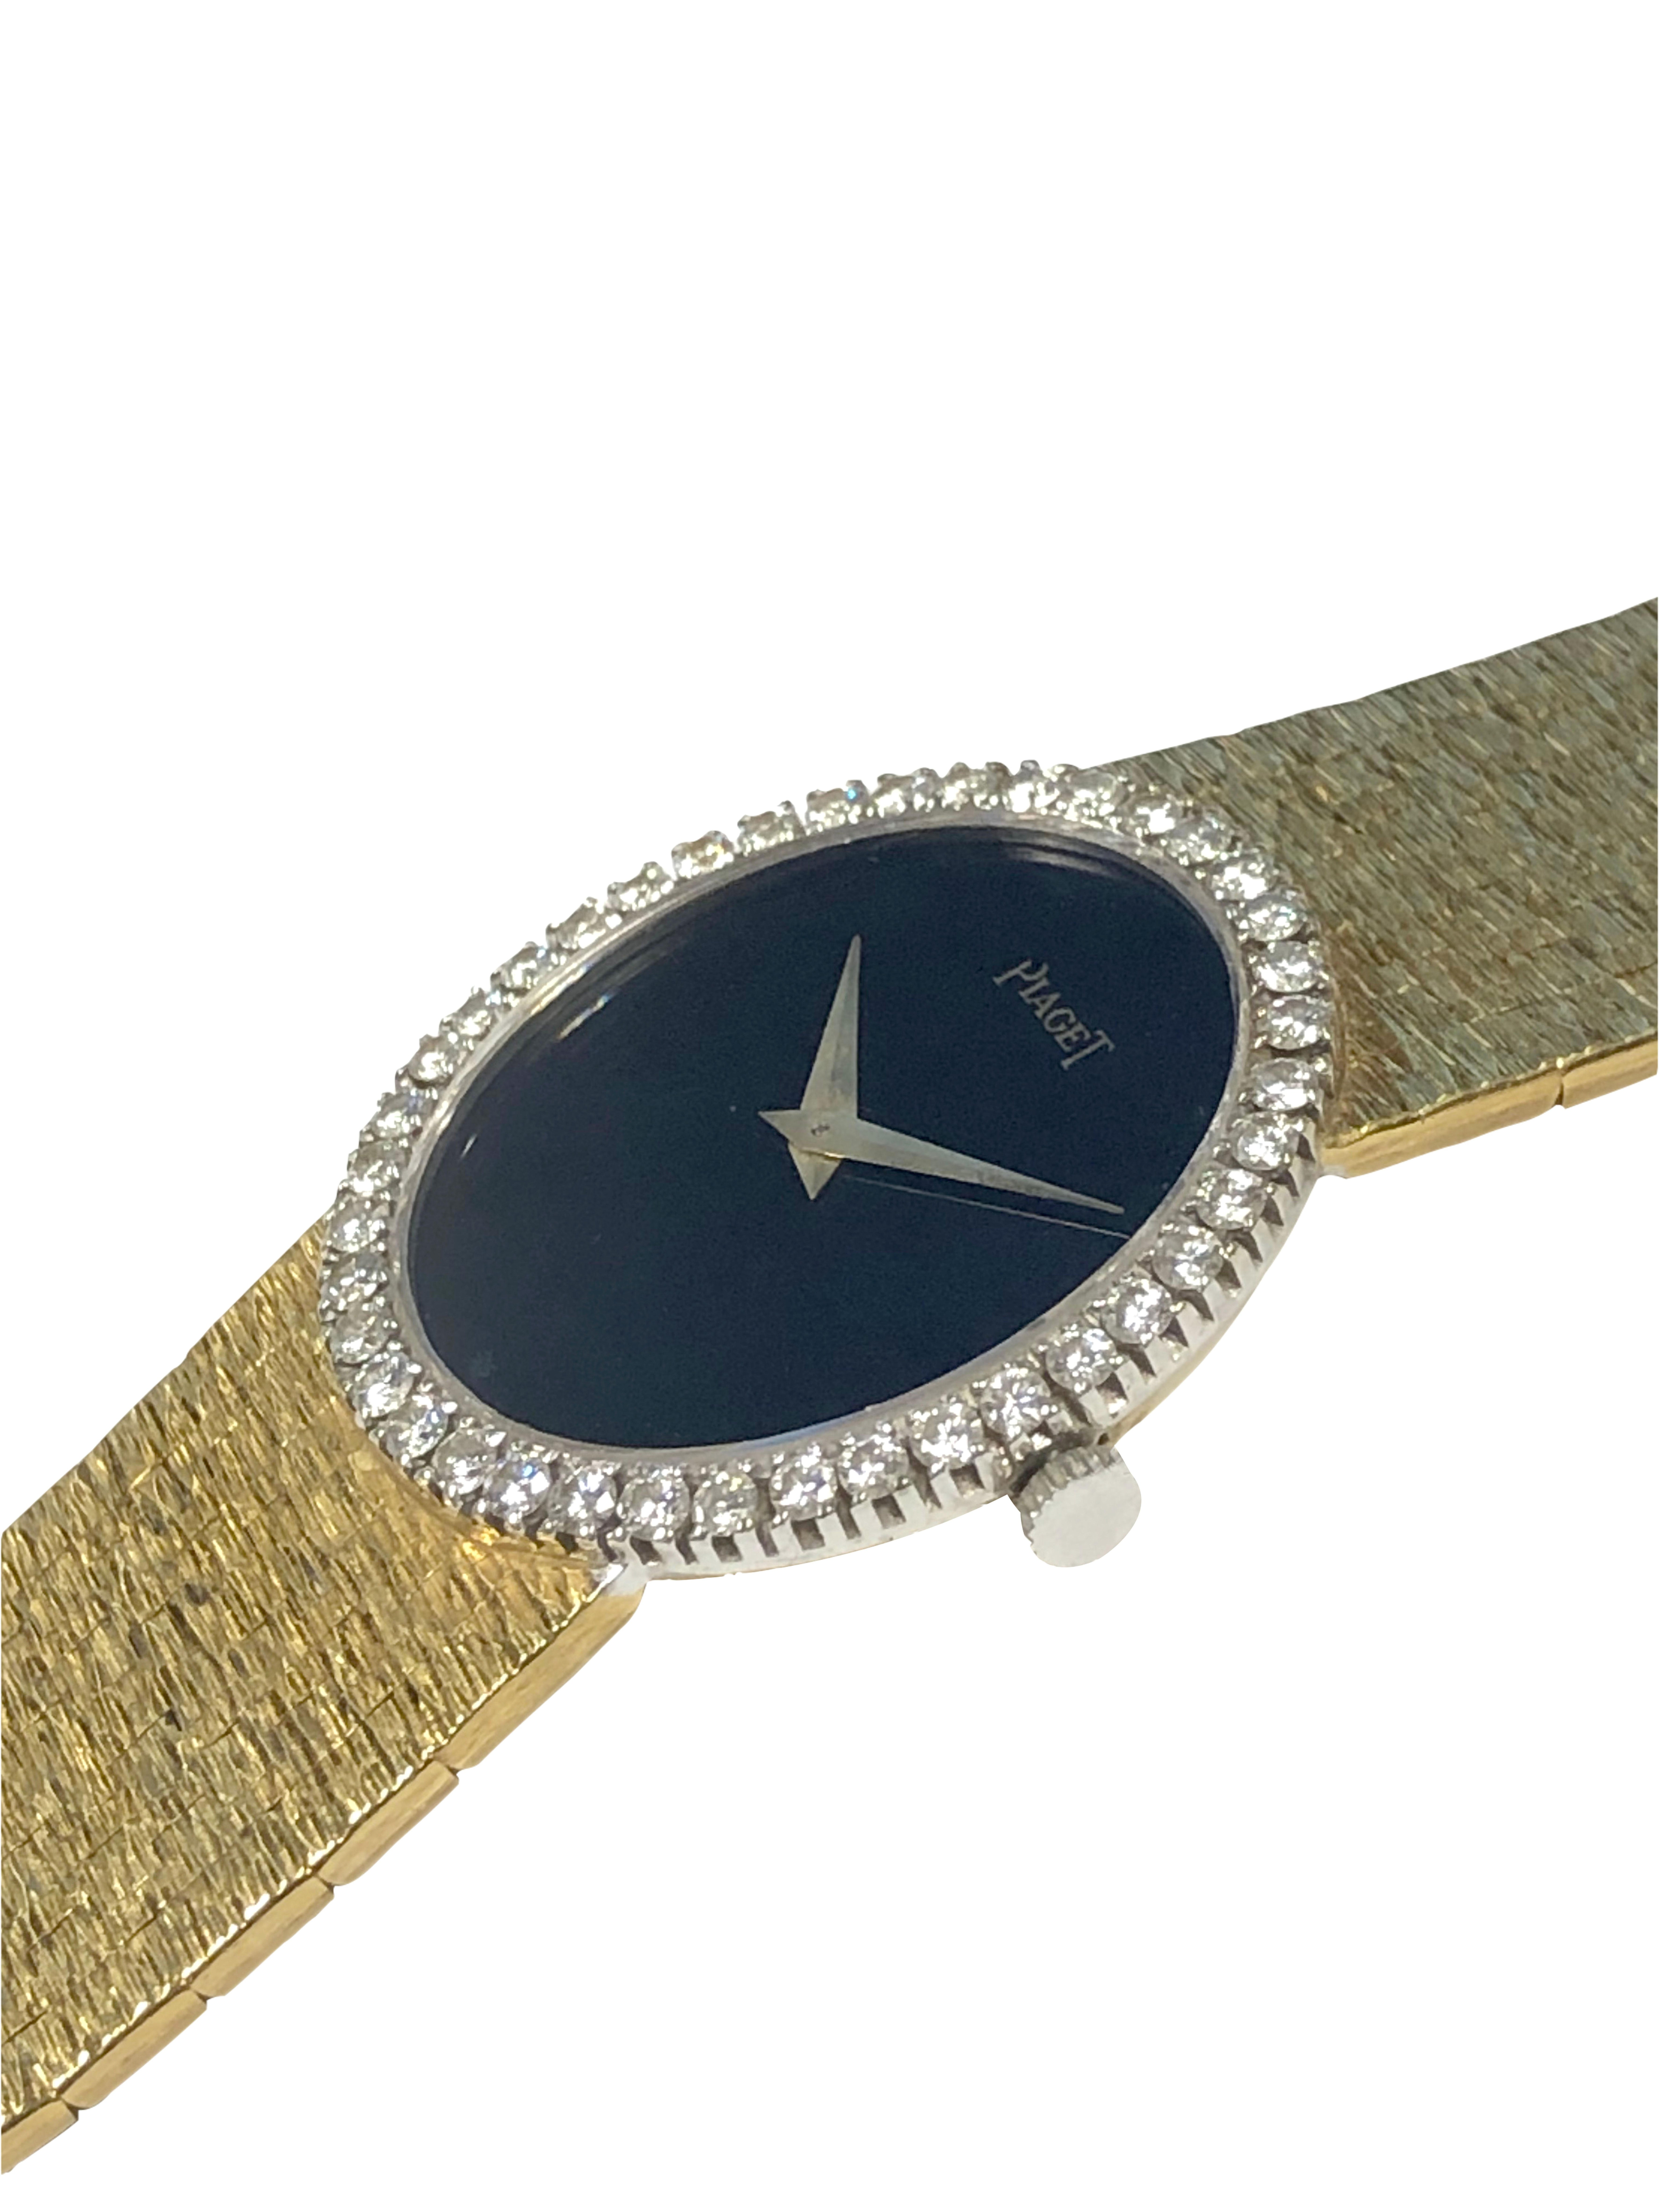 Circa 1980 Piaget Ladies Wrist Watch,  28 X 19 M.M. 18K Yellow Gold 2 piece case with a White Gold Bezel set with round brilliant cut Diamonds totaling 1 Carat. 17 Jewel Mechanical Manual wind movement, Black Onyx Dial. 15/8 inch wide 18K Yellow